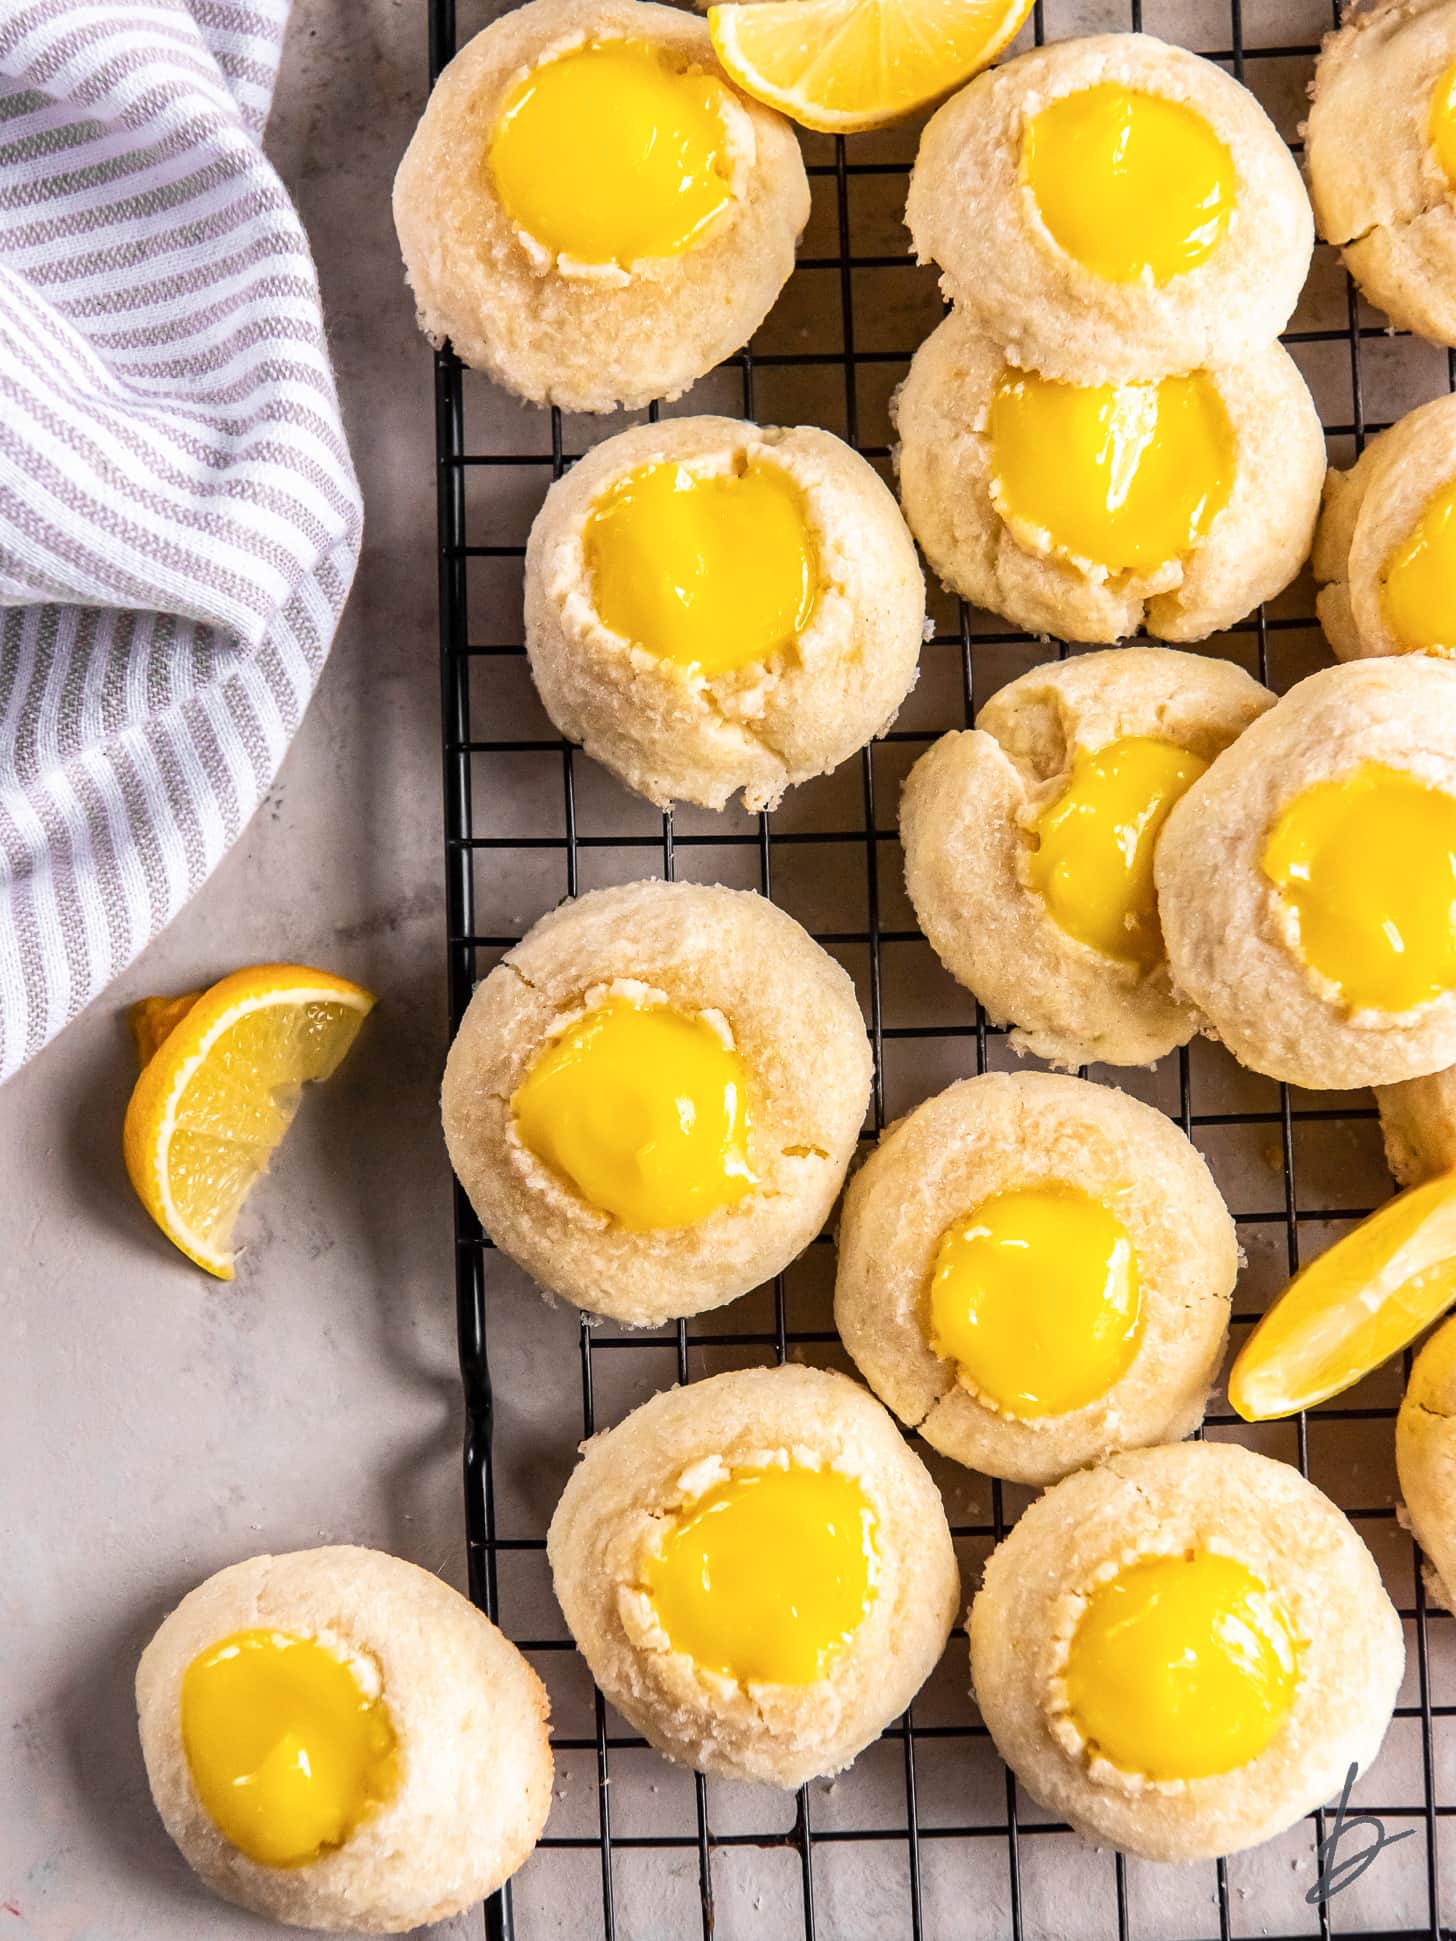 lemon curd thumbprint cookies on a wire rack next to a striped kitchen cloth and lemon wedge.